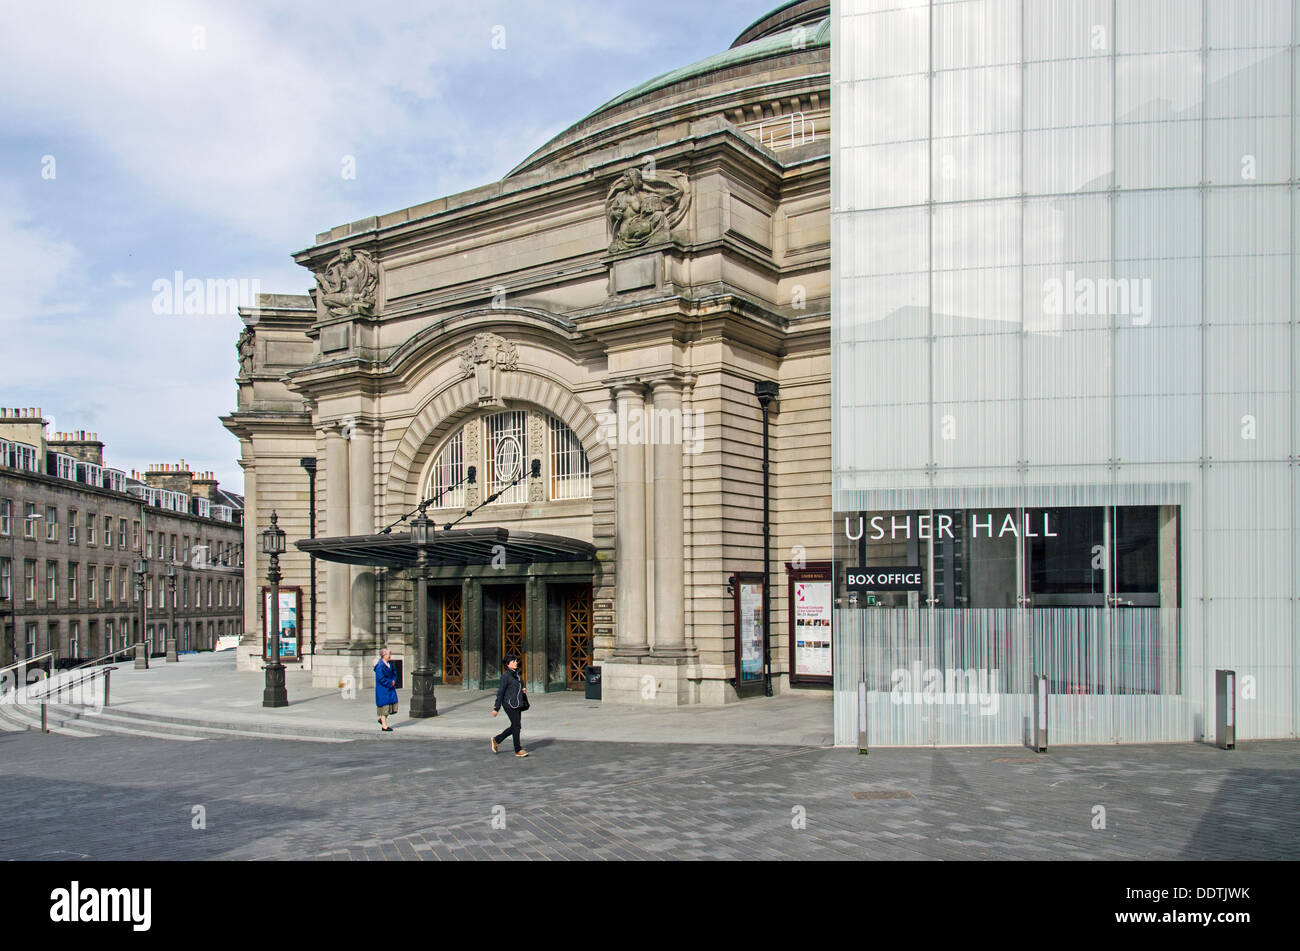 The Usher Hall on Lothian Road in the west end of Edinburgh, built in